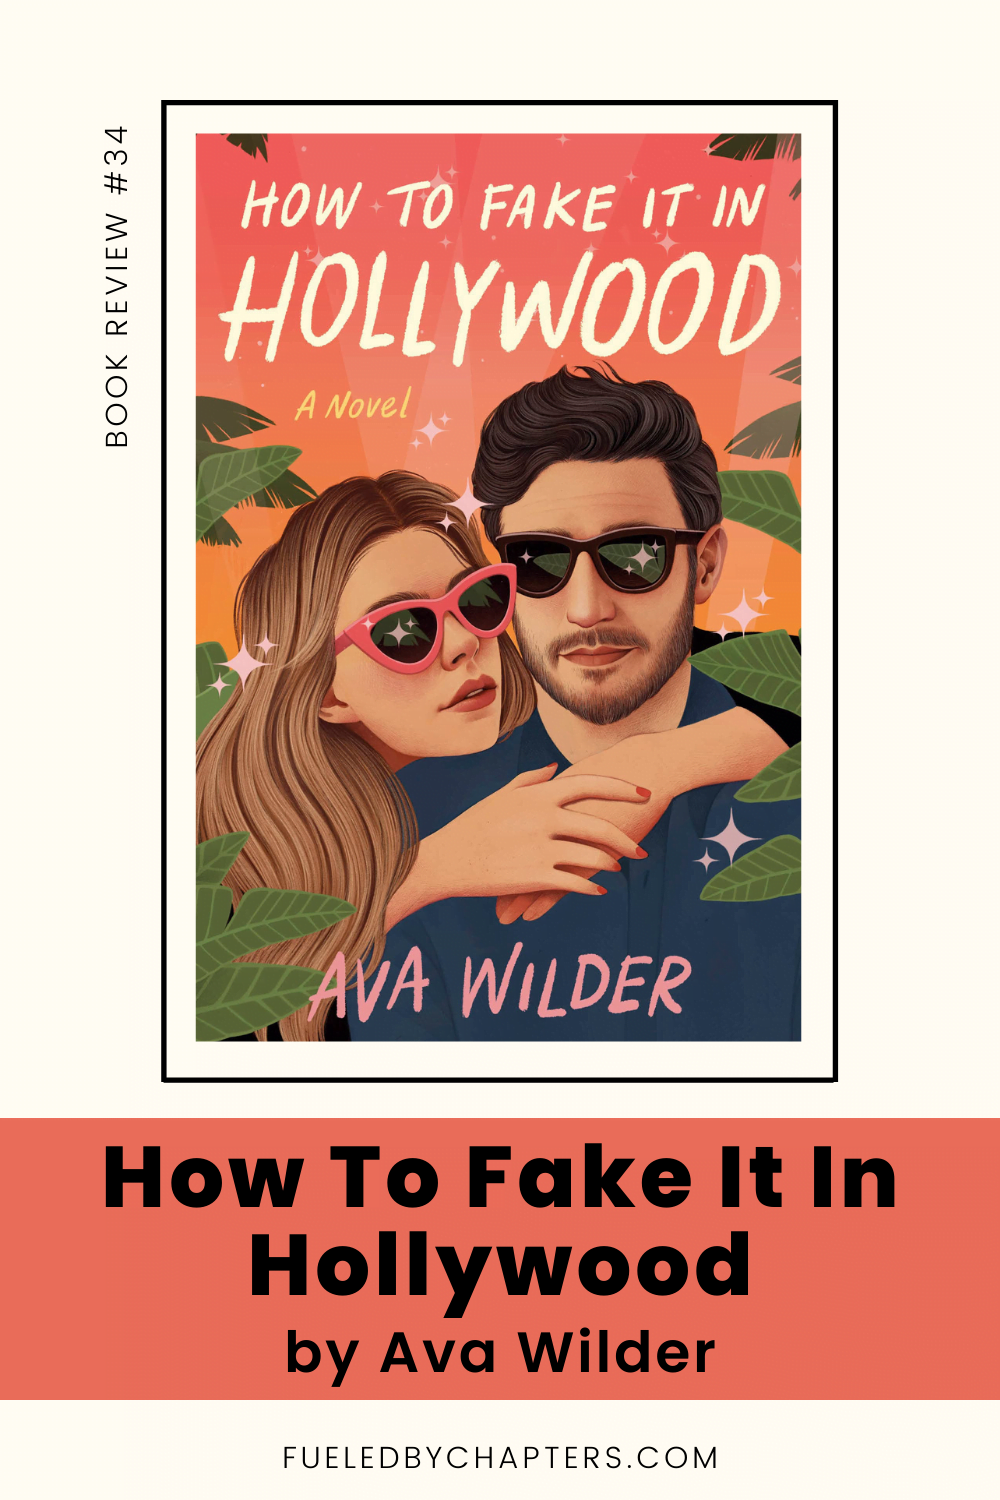 How To Fake It In Hollywood by Ava Wilder